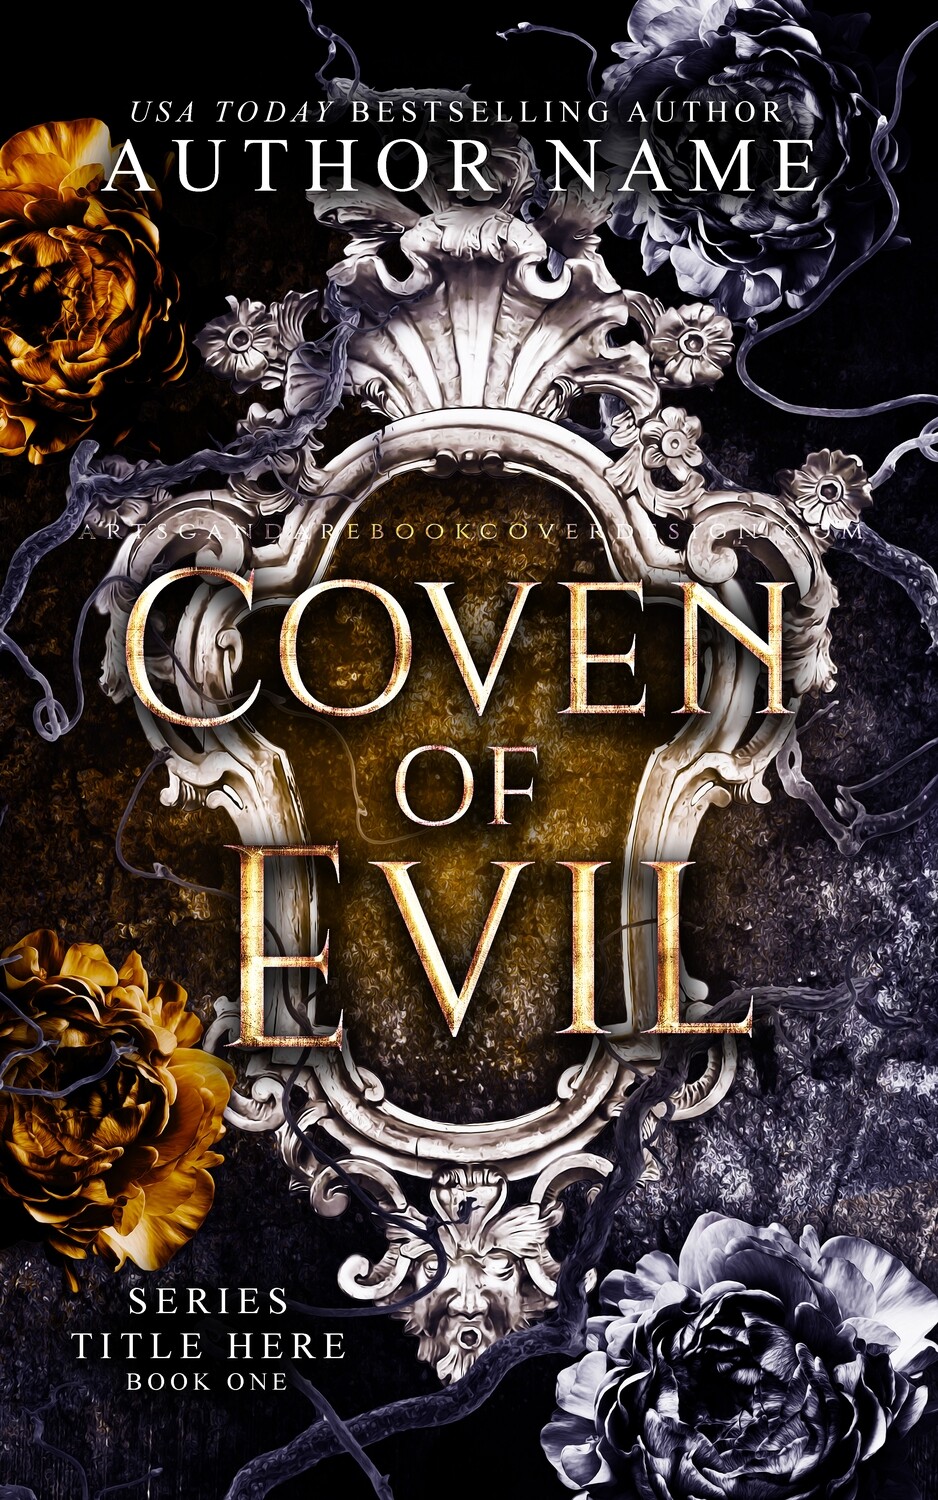 COVEN OF EVIL